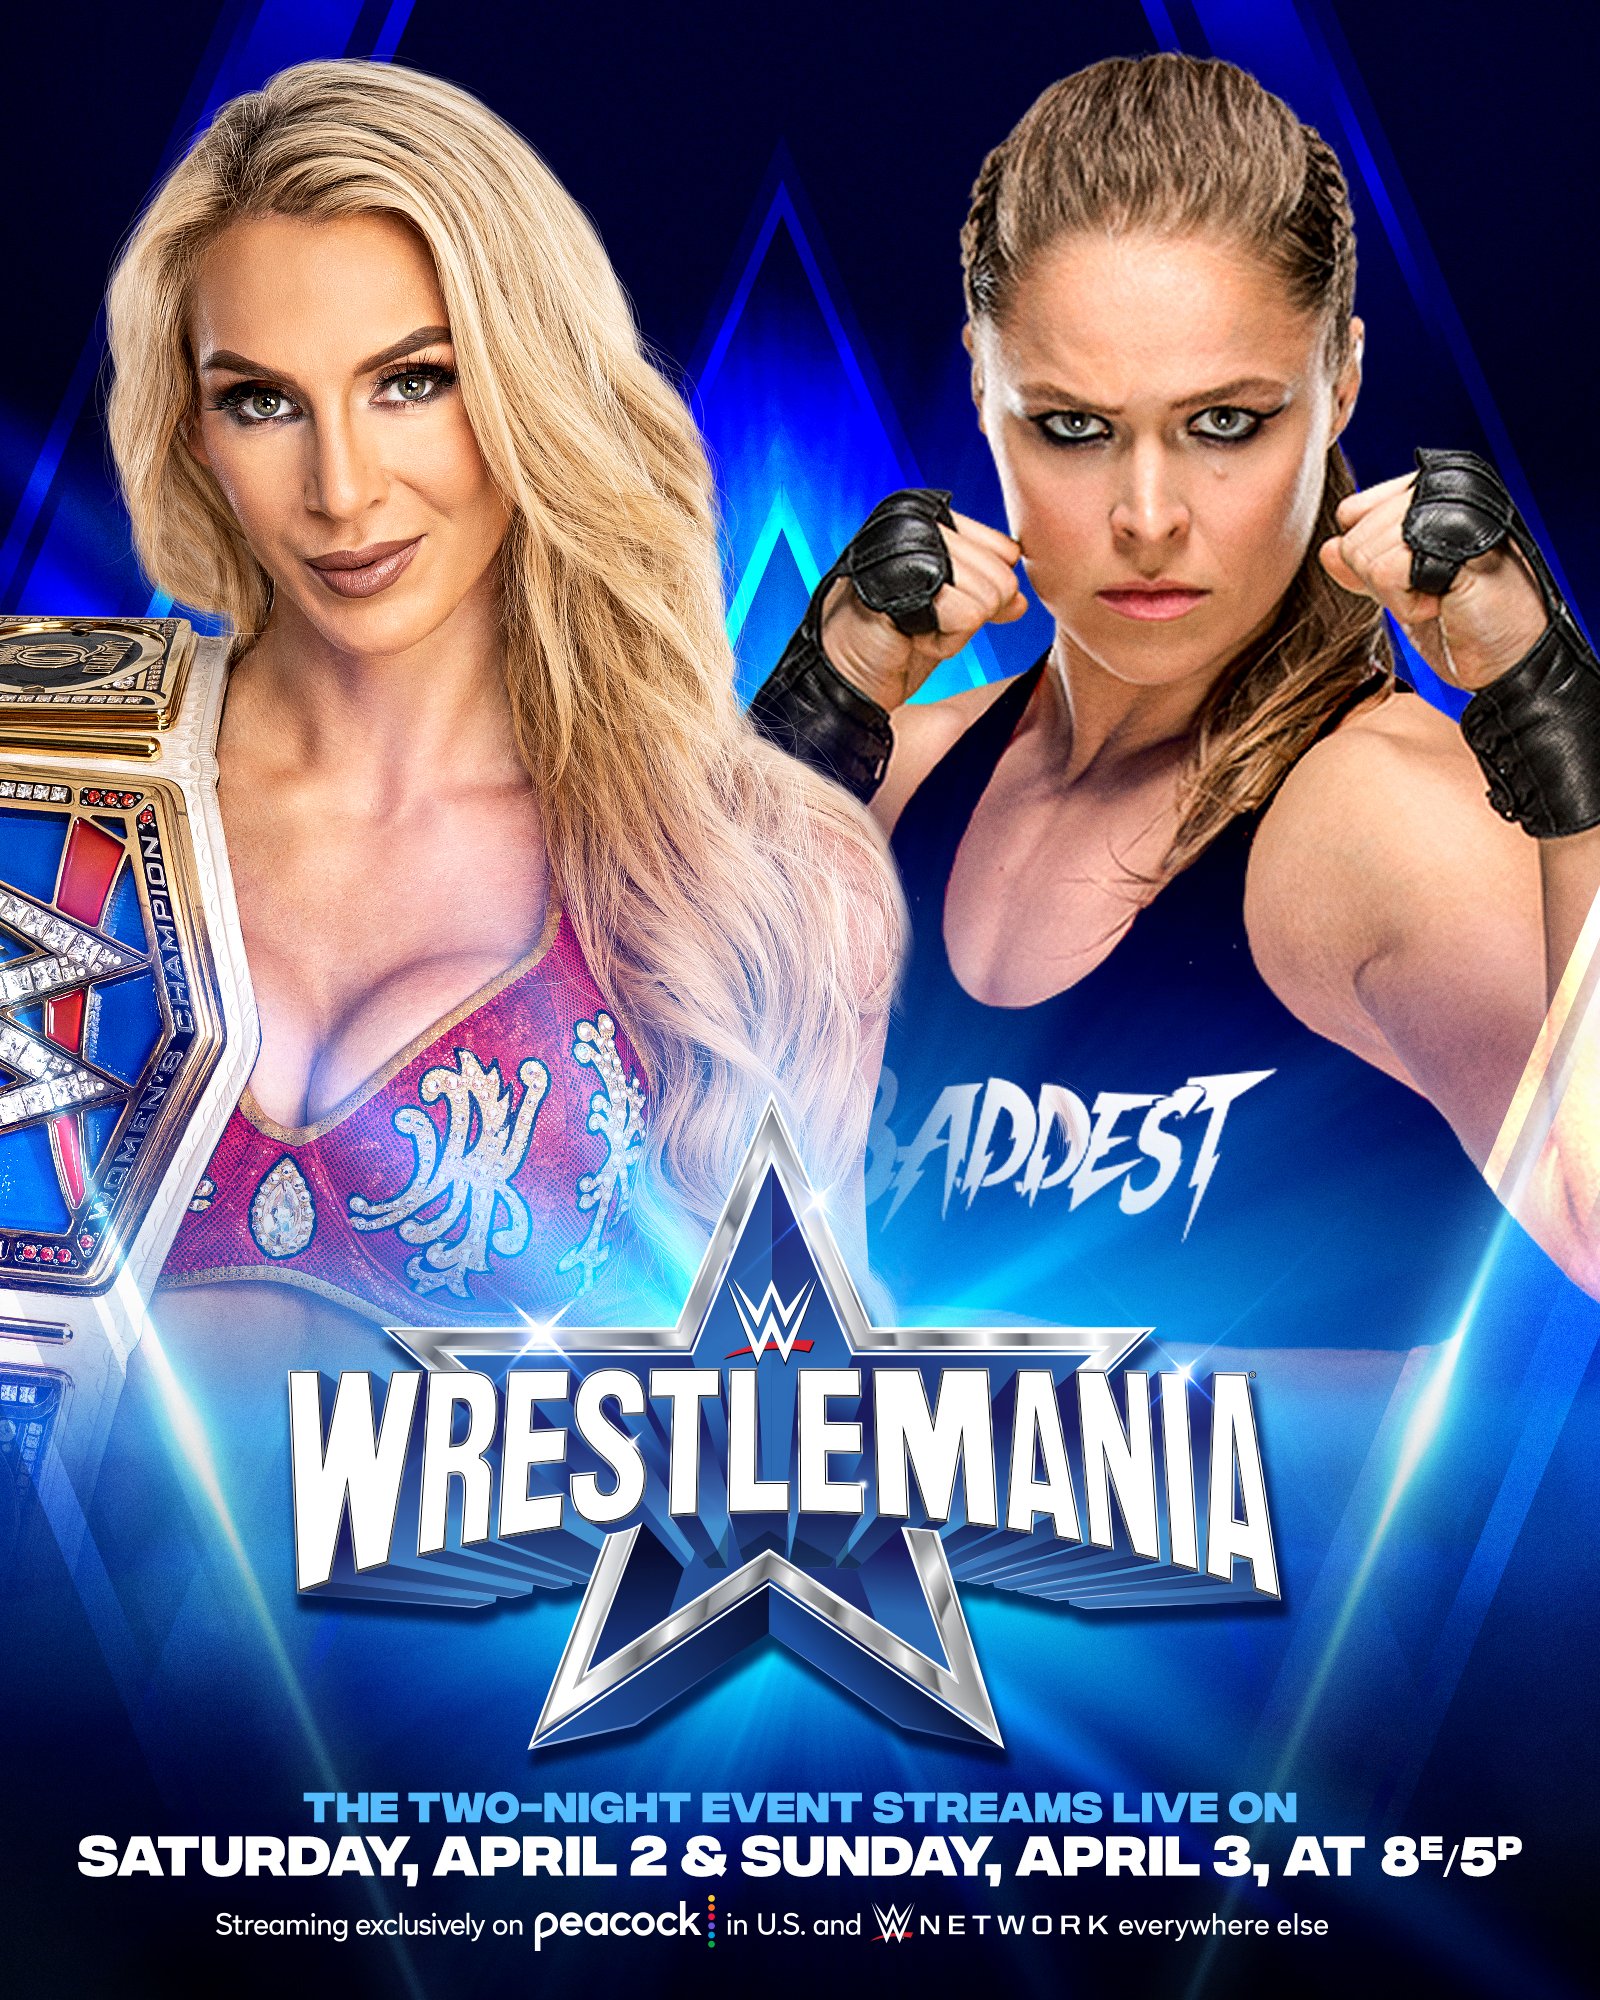 Promotional image of Charlotte Flair vs. Ronda Rousey from WrestleMania 38 - WWE